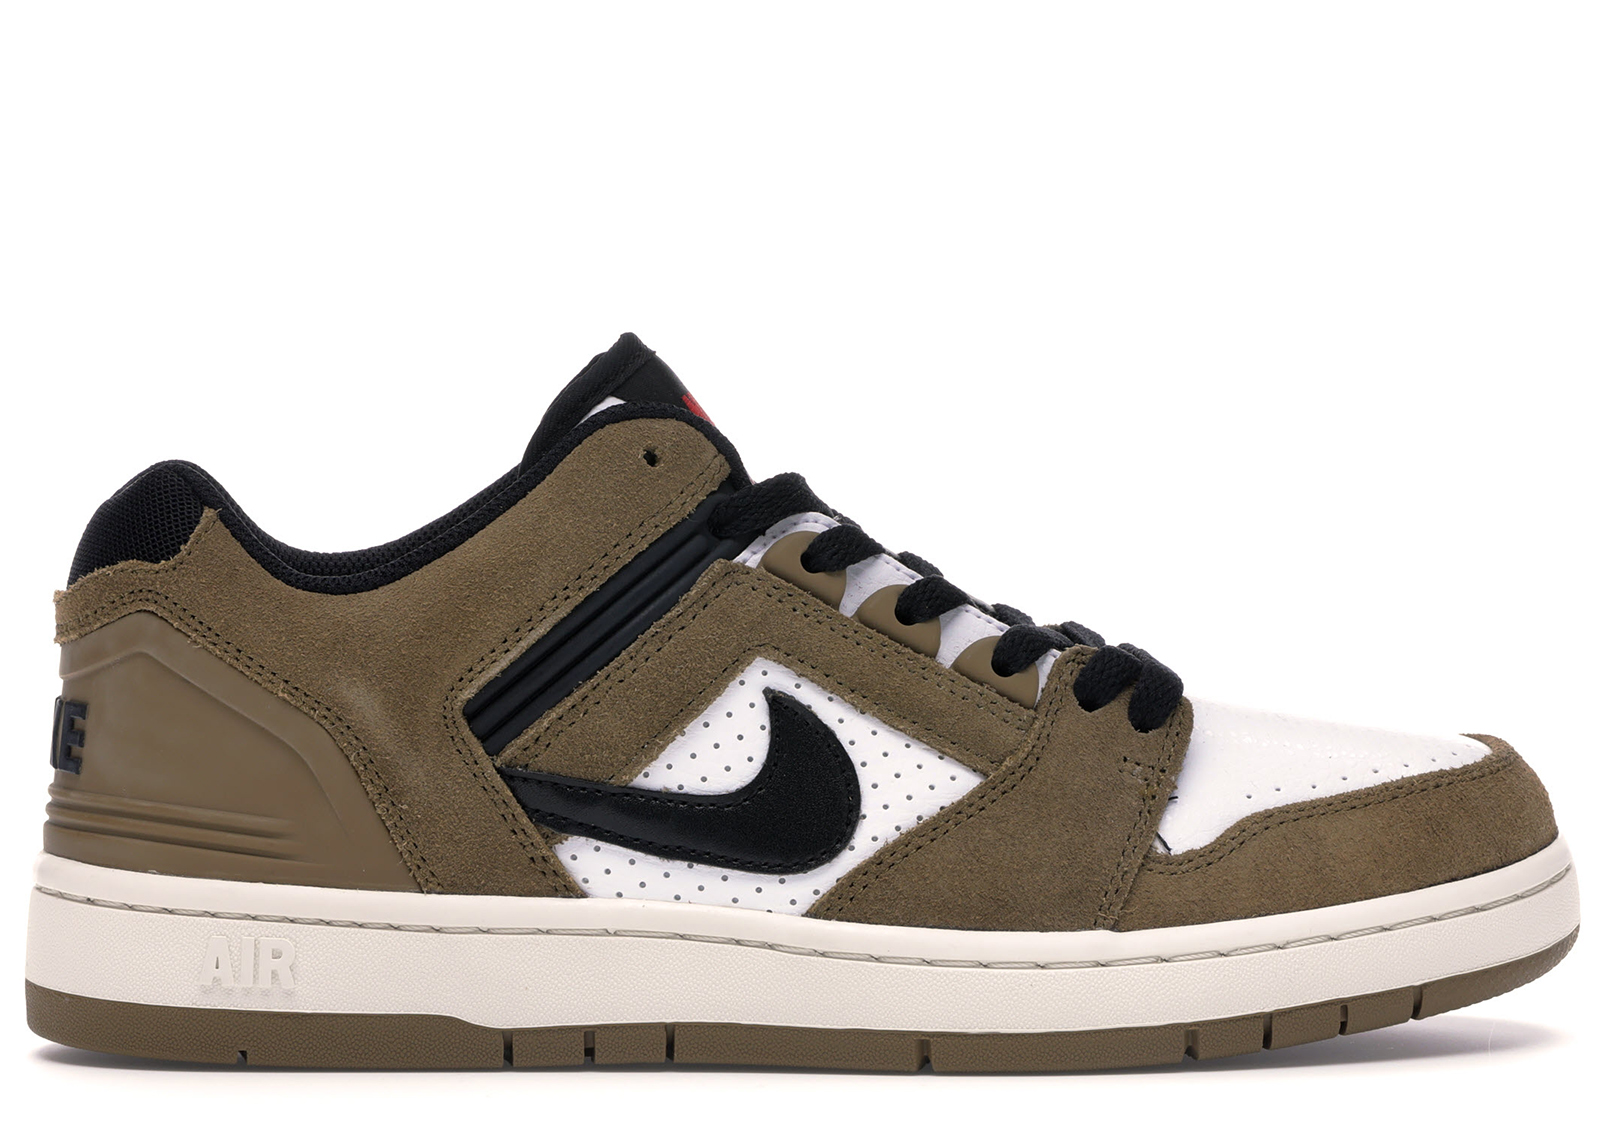 Nike SB Air Force 2 Low Escape - AO0300-300 - US